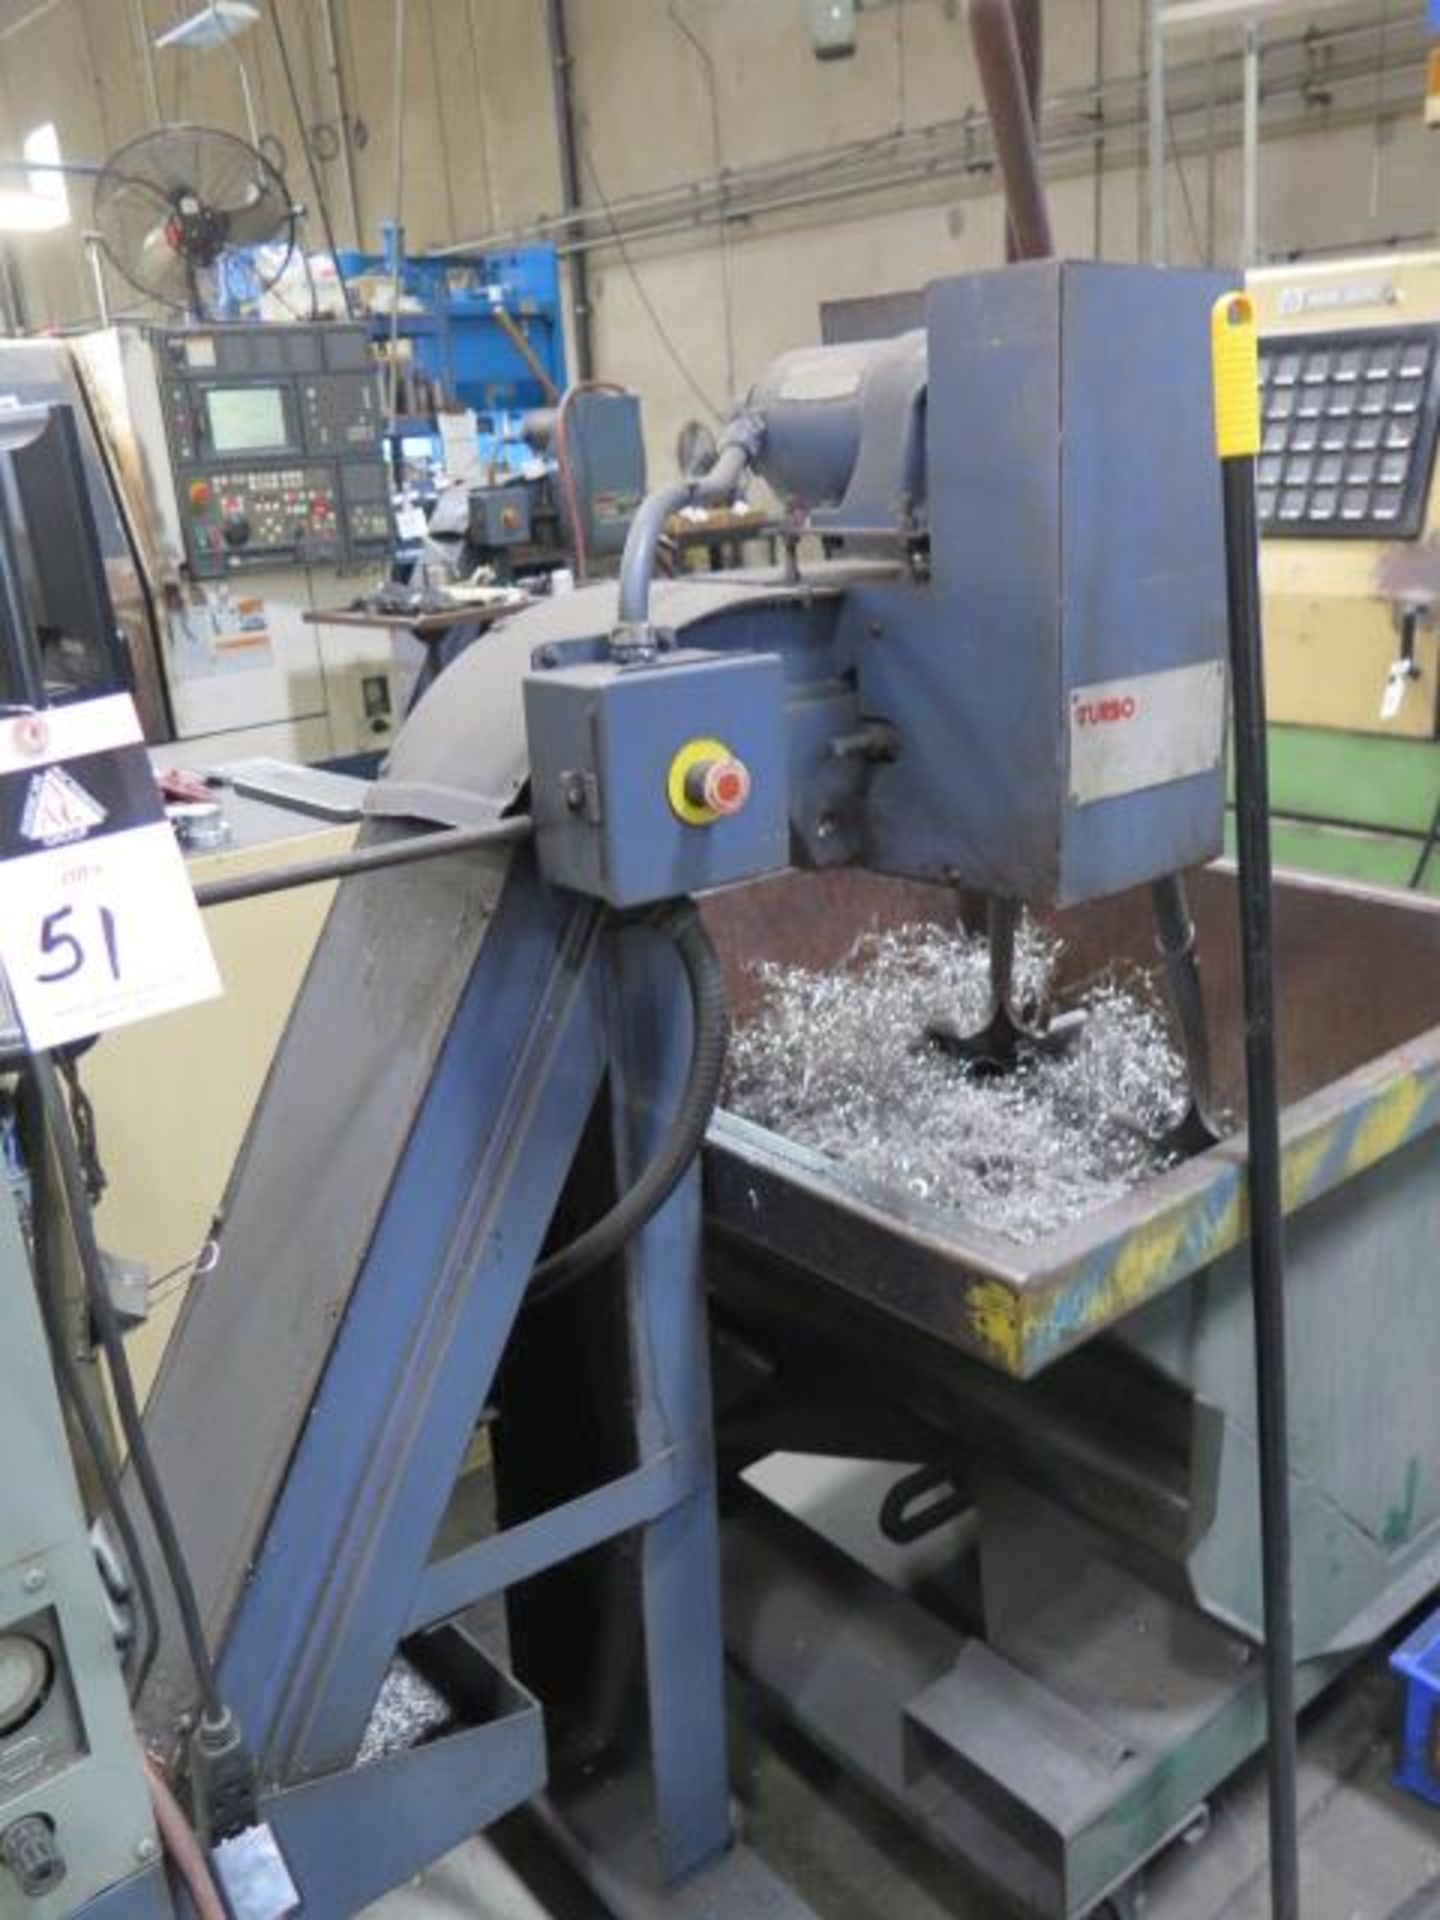 1997 Mori Seiki SL-250BMC Live Turret CNC Turning Center s/n 268 w/ MSC-518 Controls, SOLD AS IS - Image 11 of 12